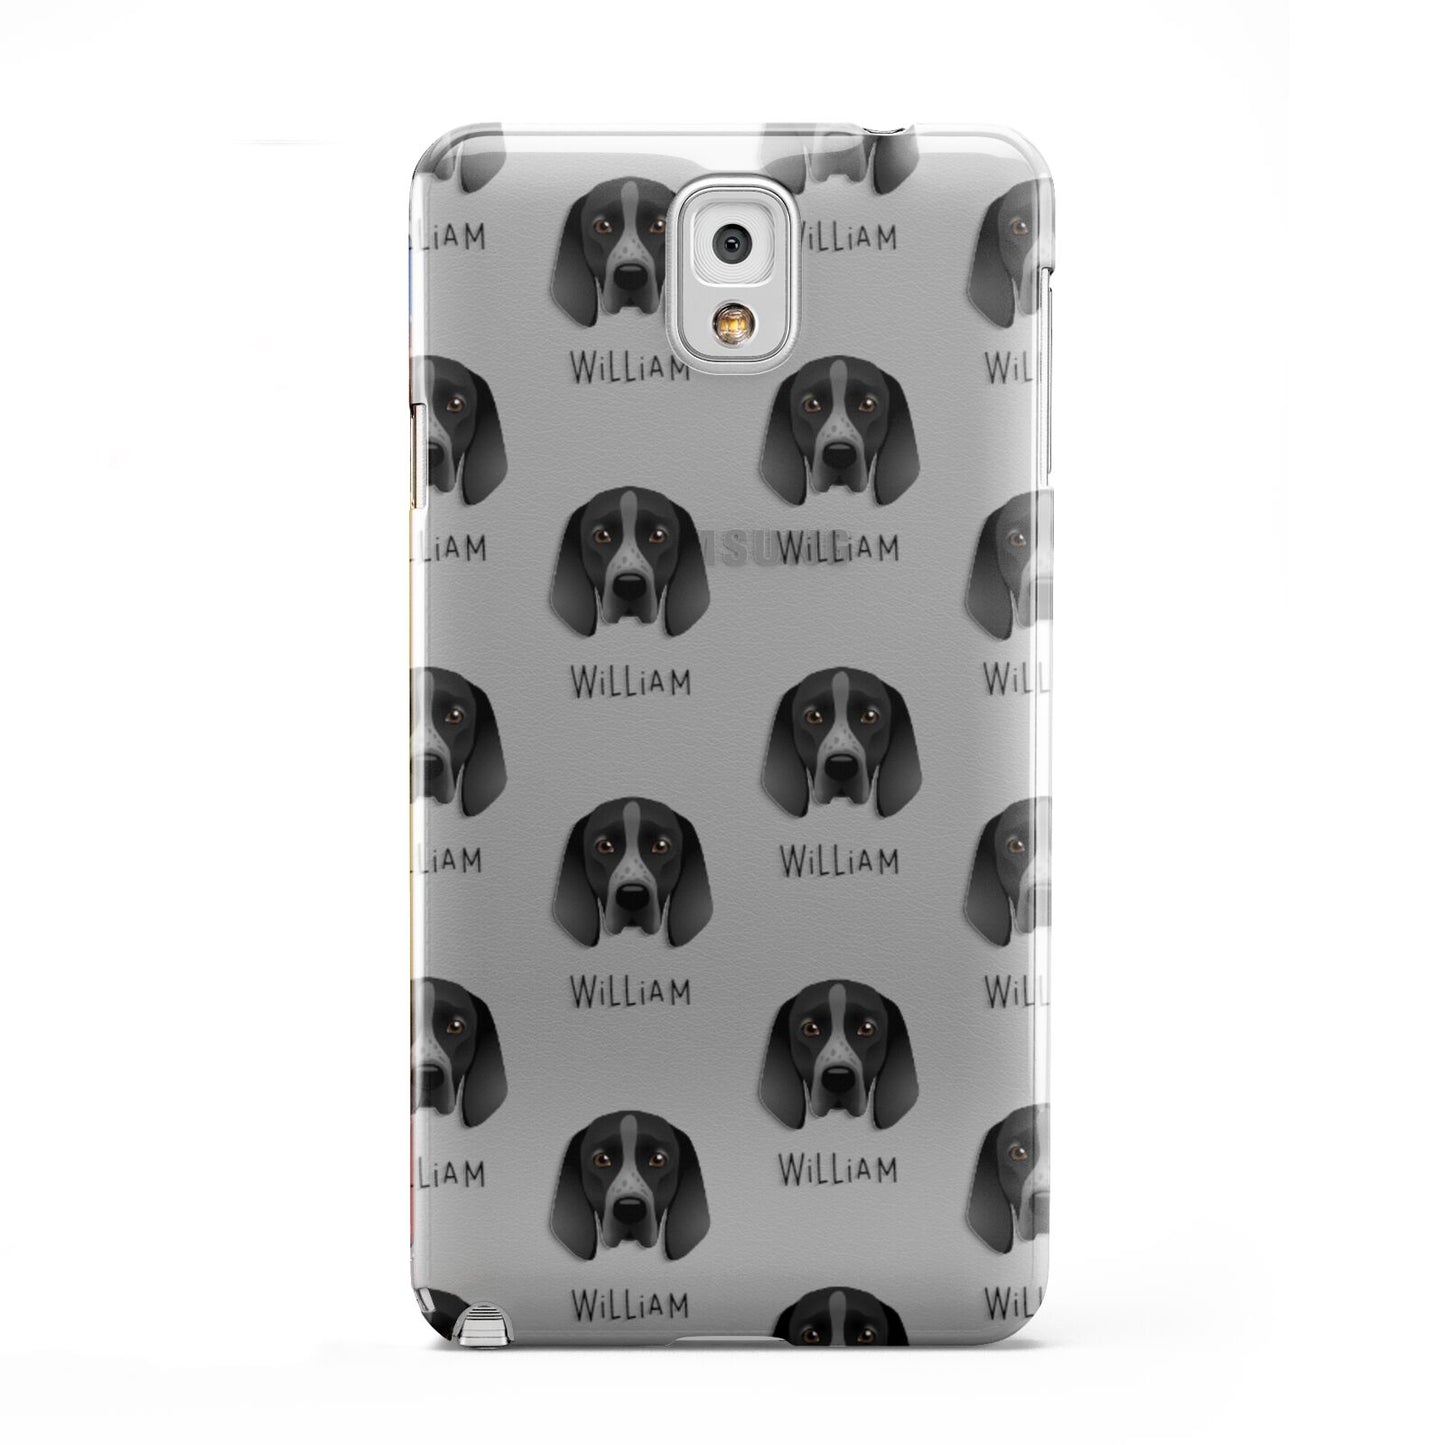 Braque D Auvergne Icon with Name Samsung Galaxy Note 3 Case